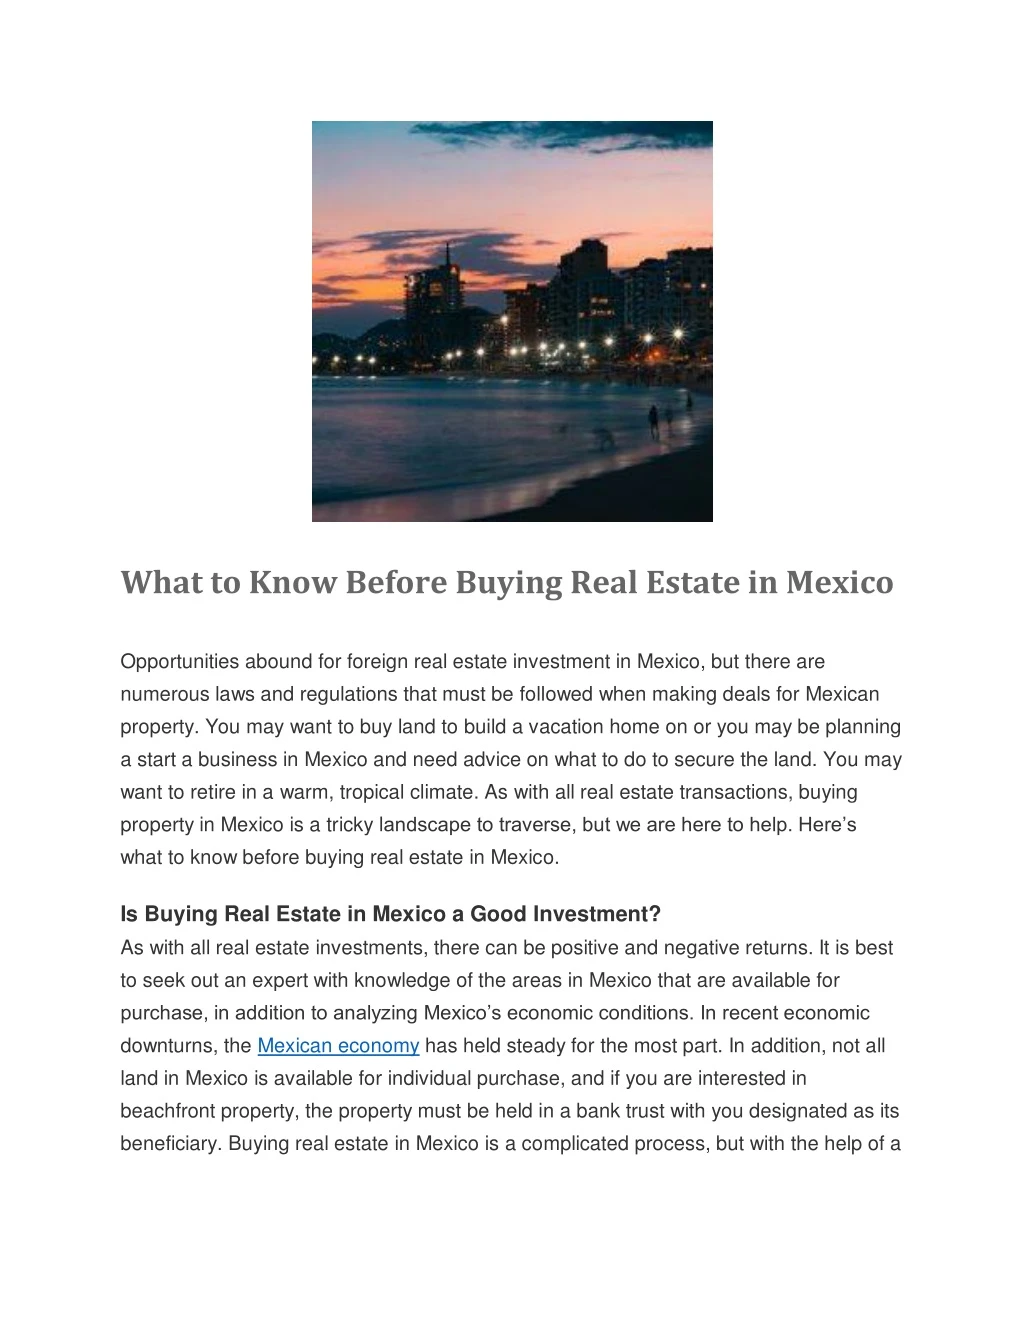 what to know before buying real estate in mexico